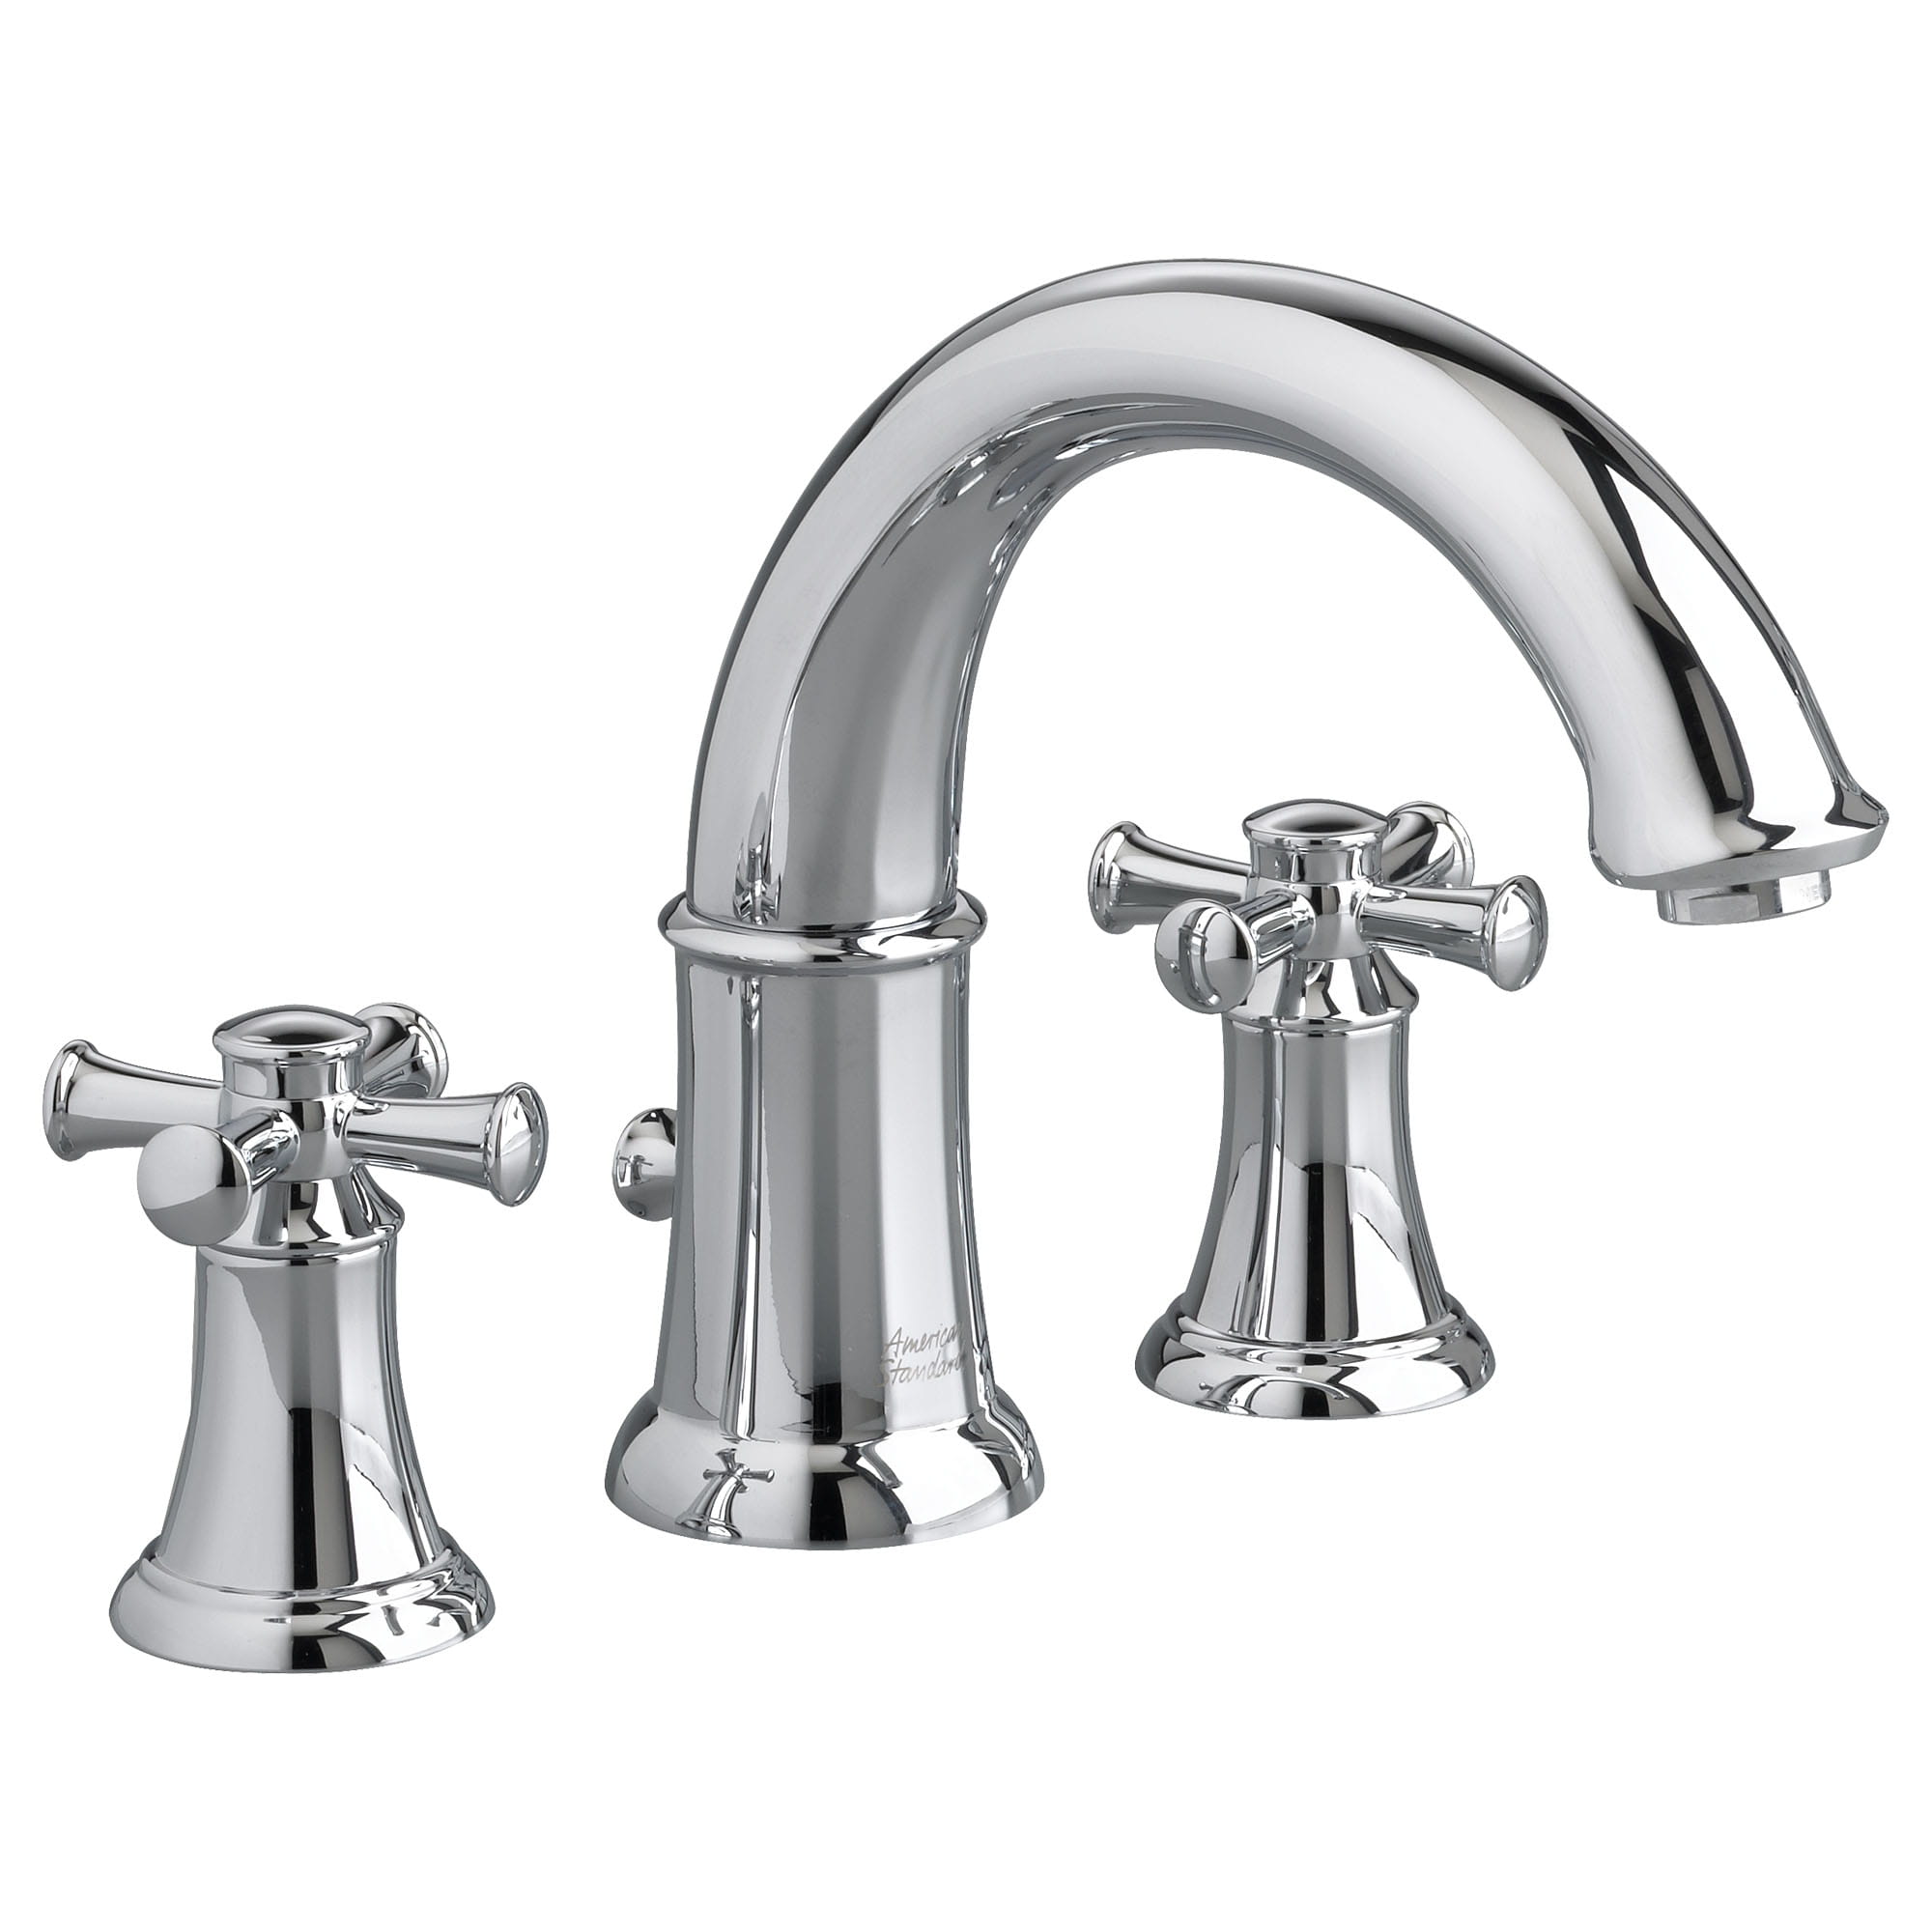 Portsmouth Bathtub Faucet for Flash Rough-in Valve with Lever Handles